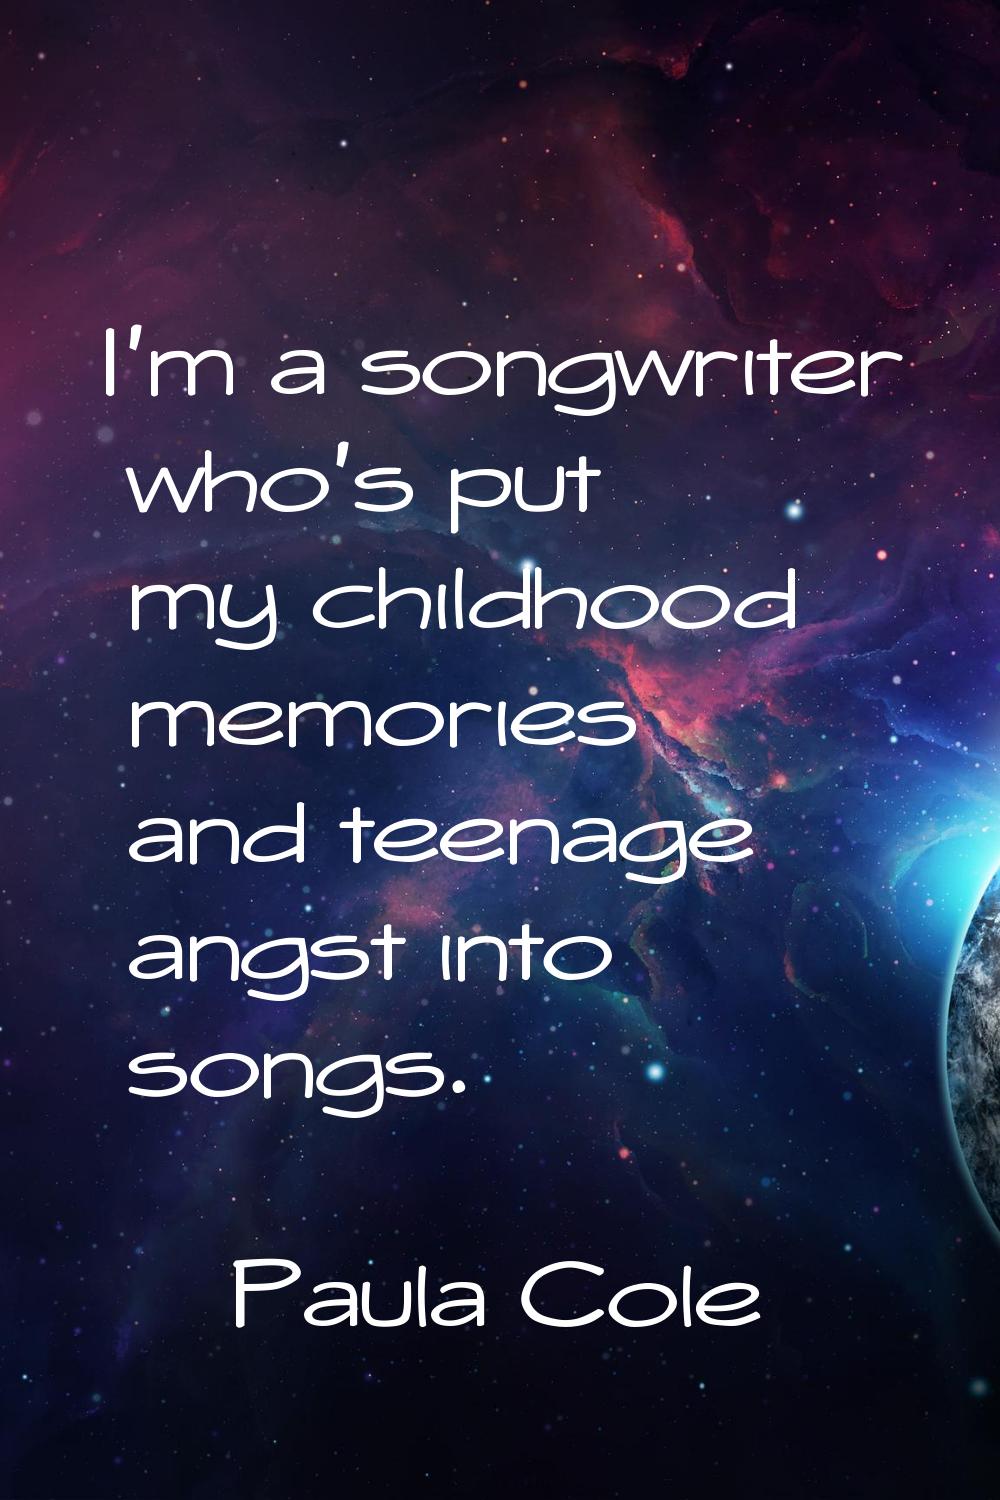 I'm a songwriter who's put my childhood memories and teenage angst into songs.